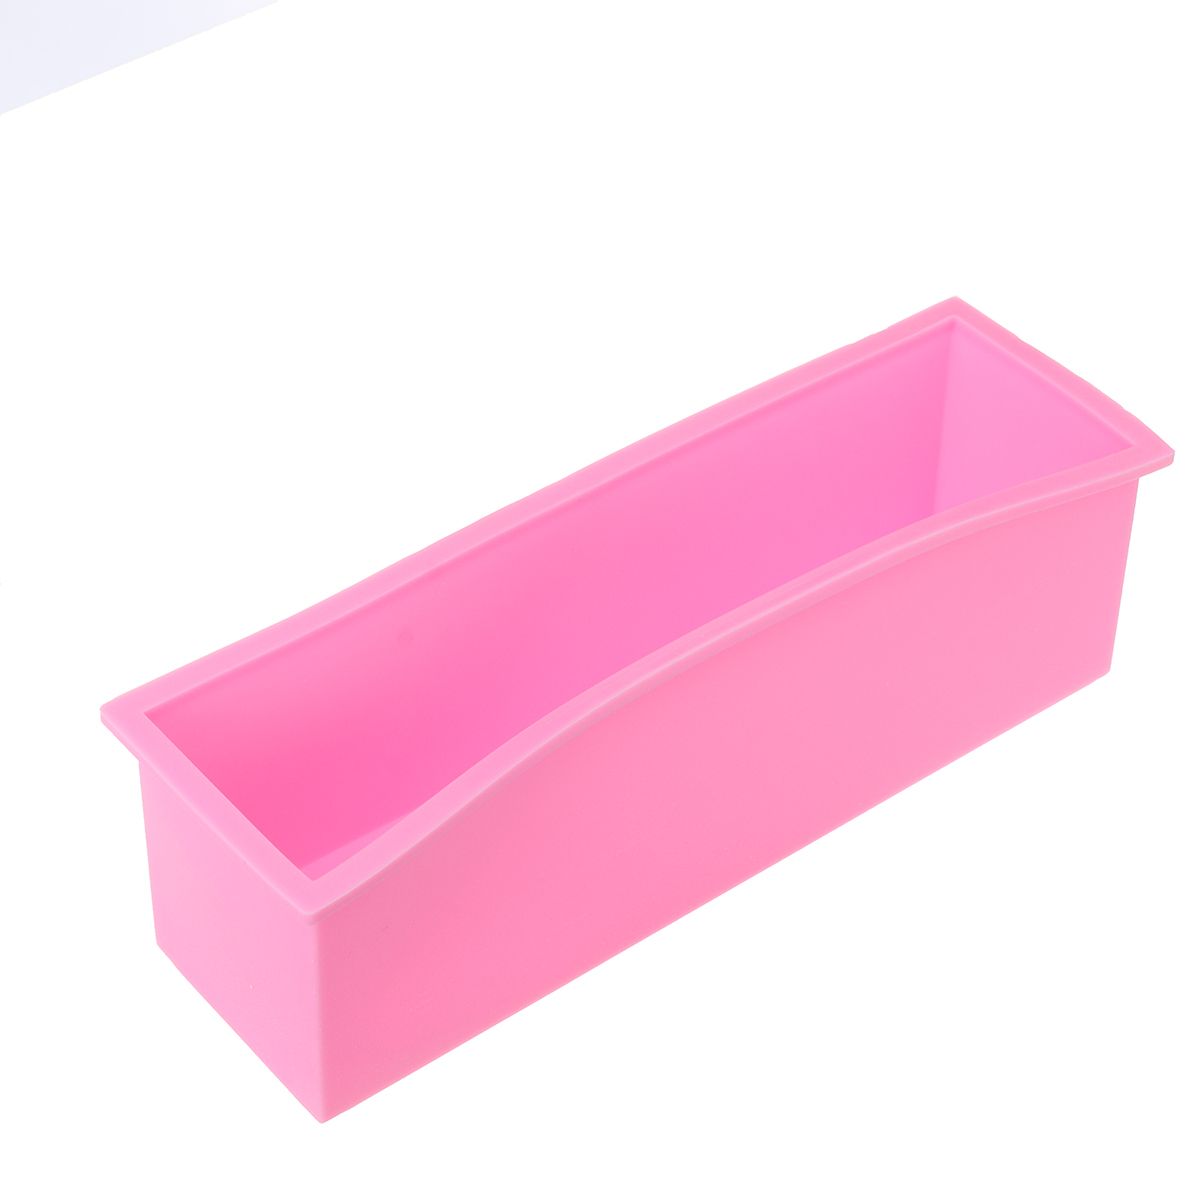 Silicone-Soap-Mold-Tray-Handmade-DIY-Making-Crafts-Toast-Baking-Rectangle-Tools-1719692